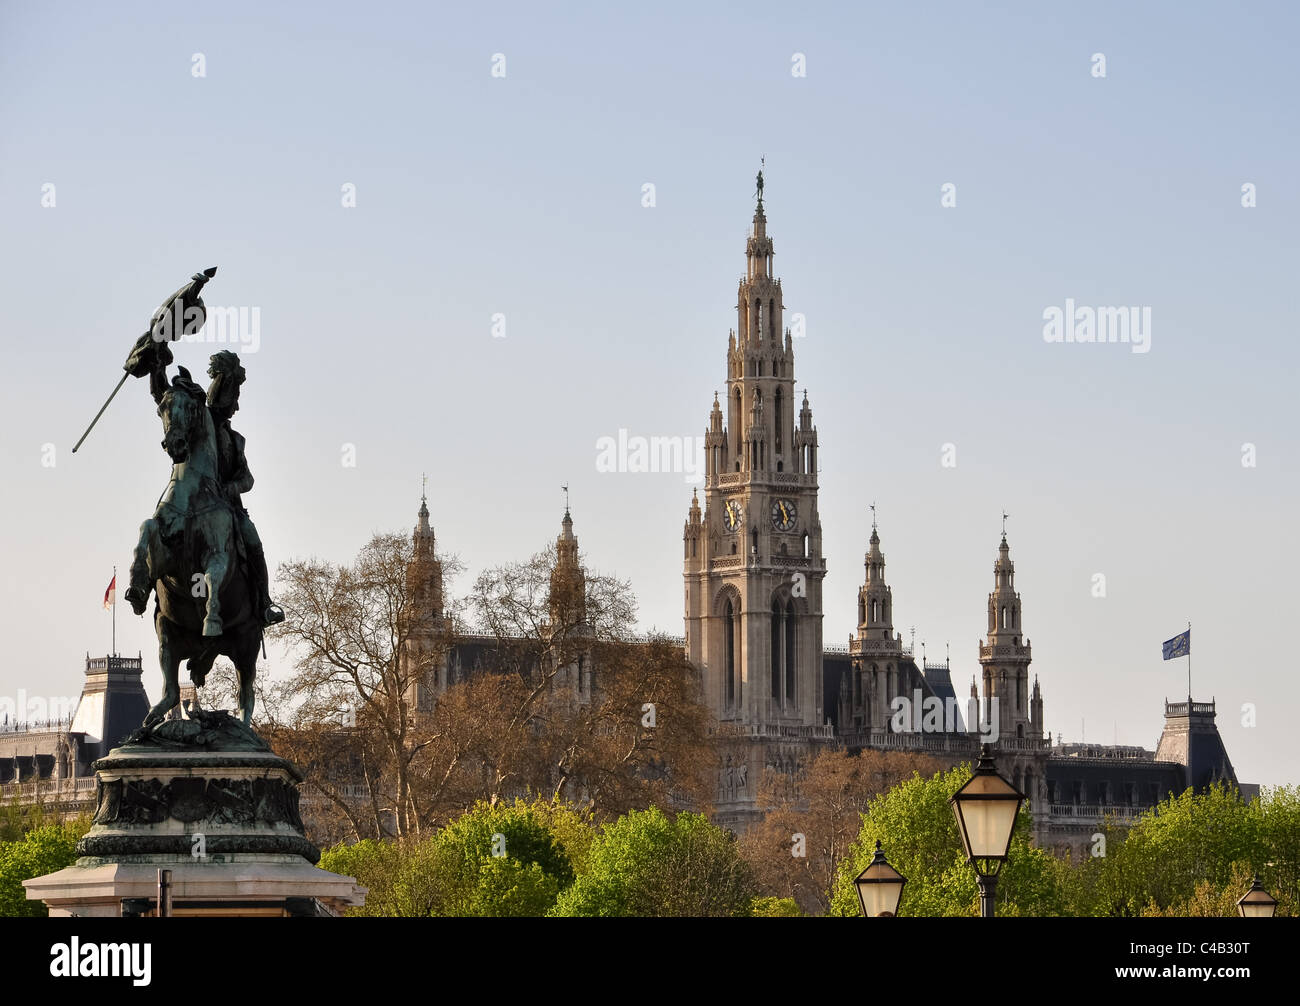 riding statue of arch duke charles in front of vienna's gothic town hall Stock Photo